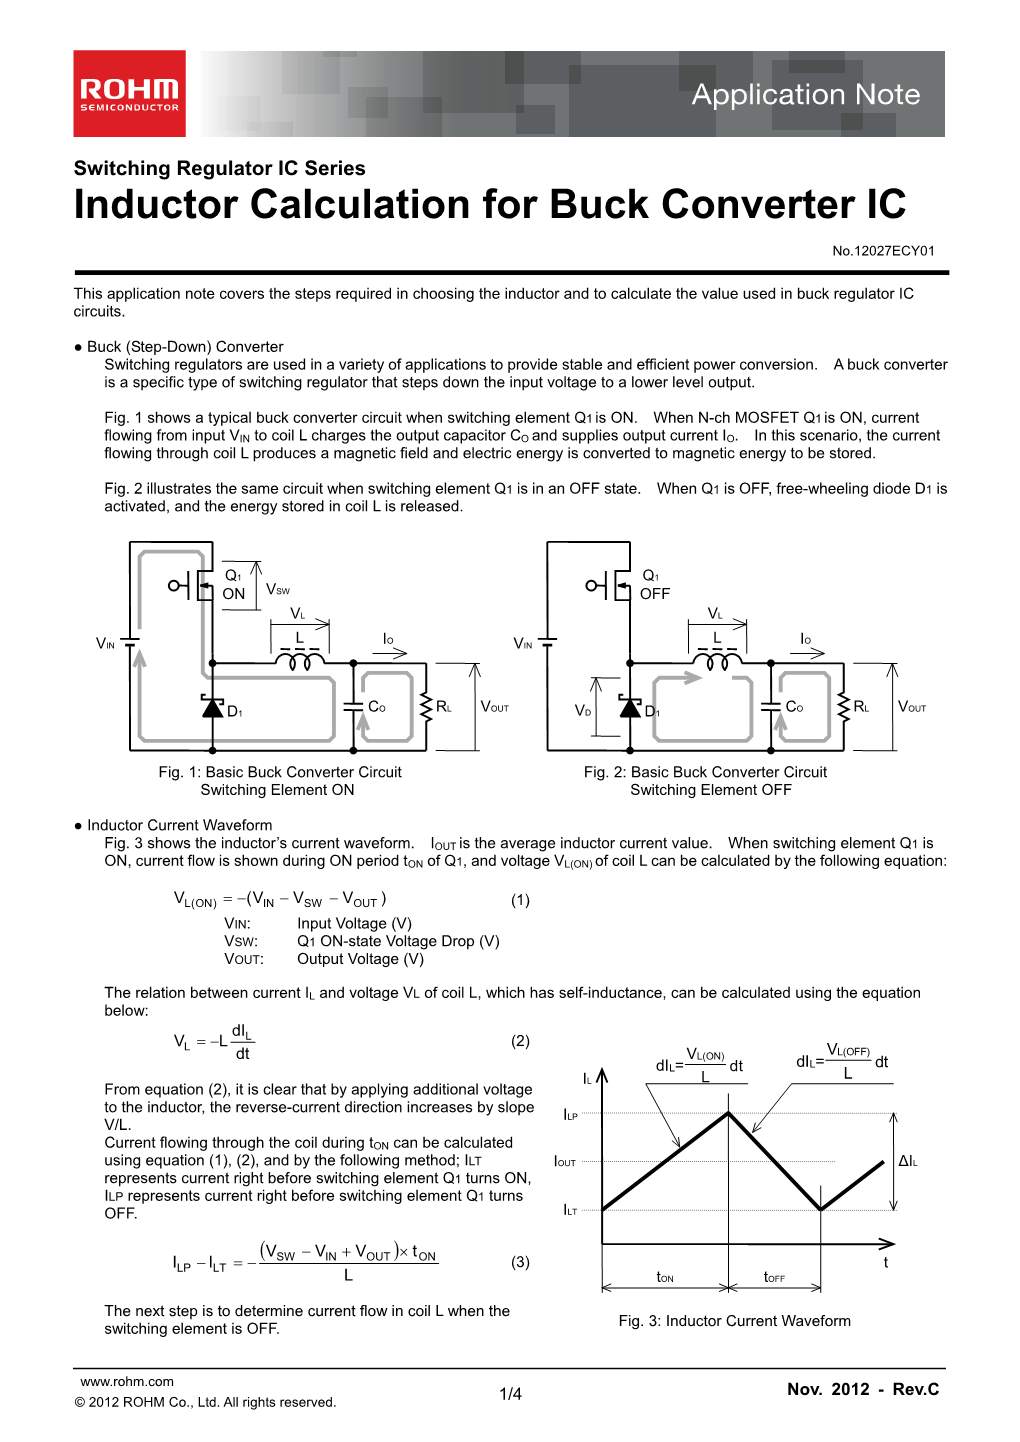 Inductor Calculation for Buck Converter IC